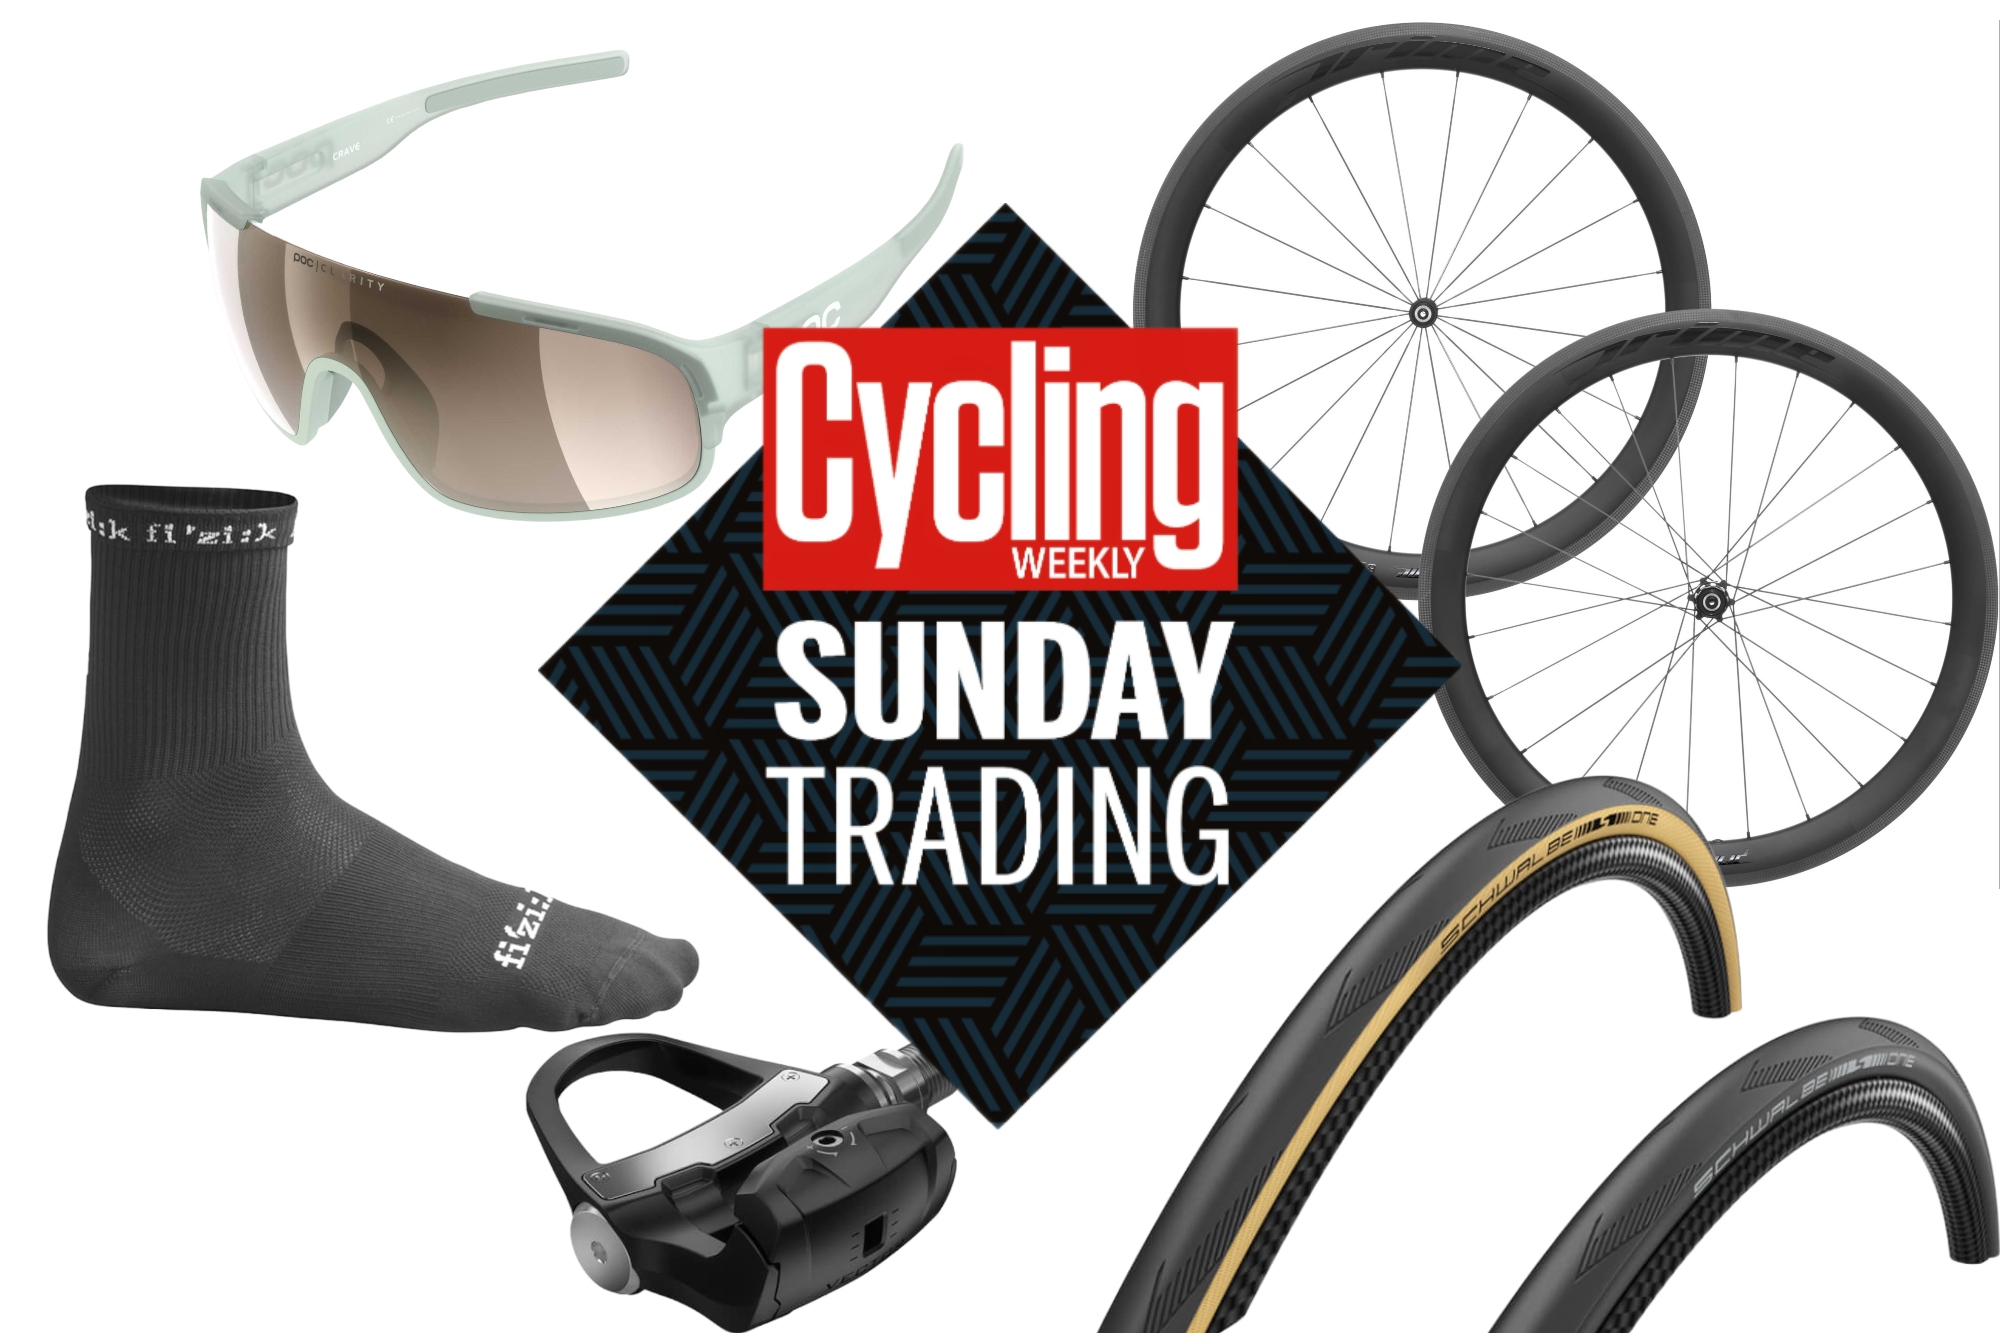 Sunday Trading Schwalbe Pro One Tires Poc Sunglasses Prime Carbon Wheels And Much More Cycling Weekly - ministry of magic brick walls roblox